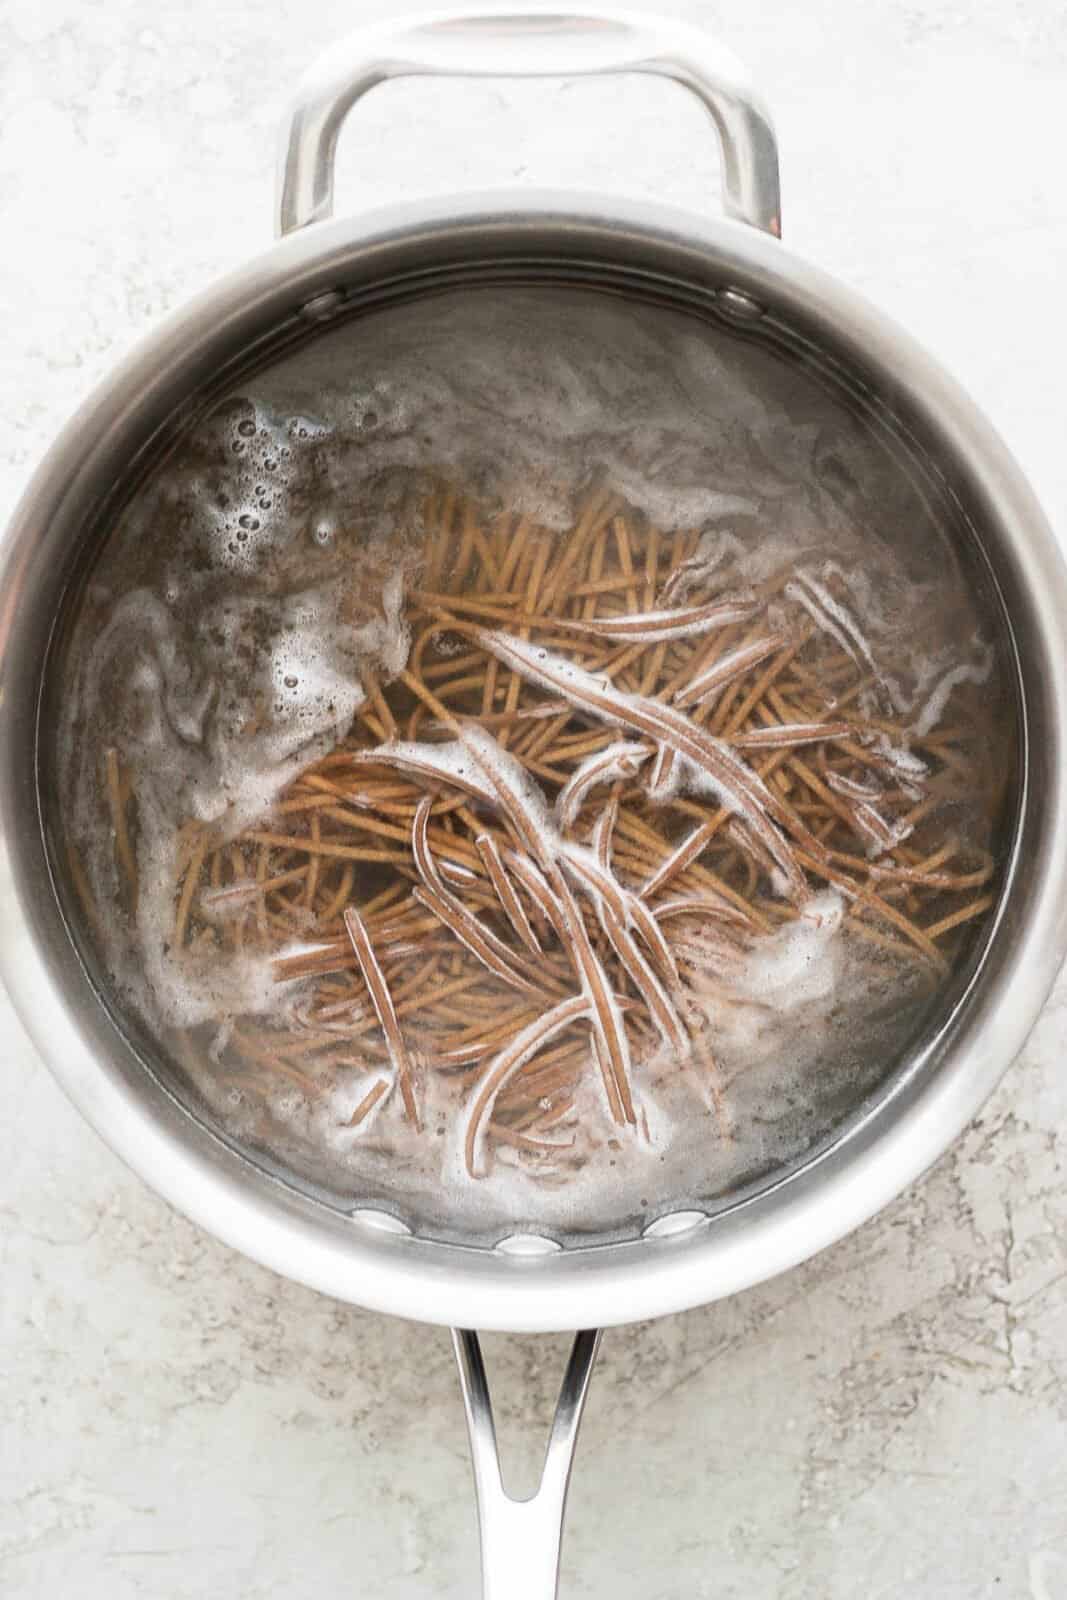 Soba noodles being cooked in a saucepan.